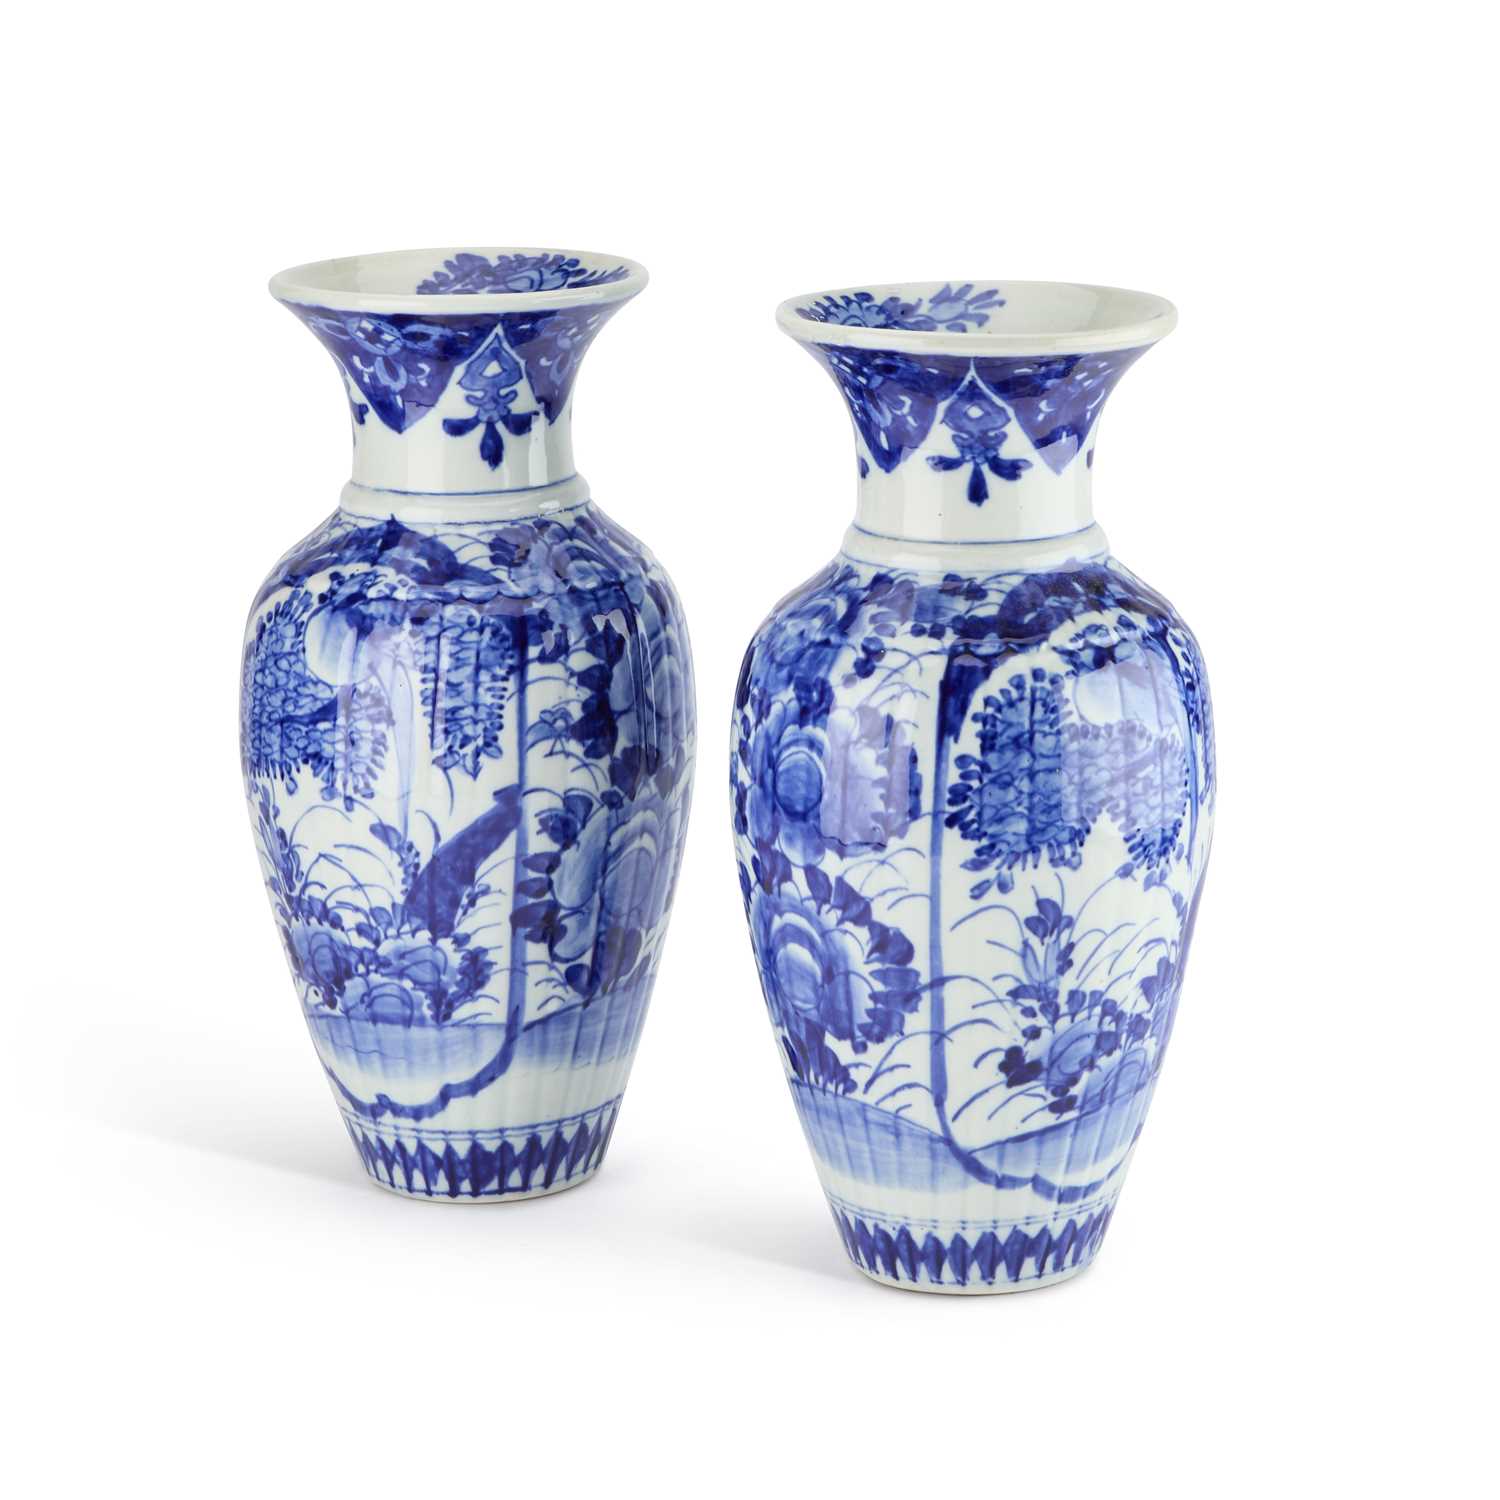 A LARGE PAIR OF JAPANESE BLUE AND WHITE VASES, CIRCA 1900